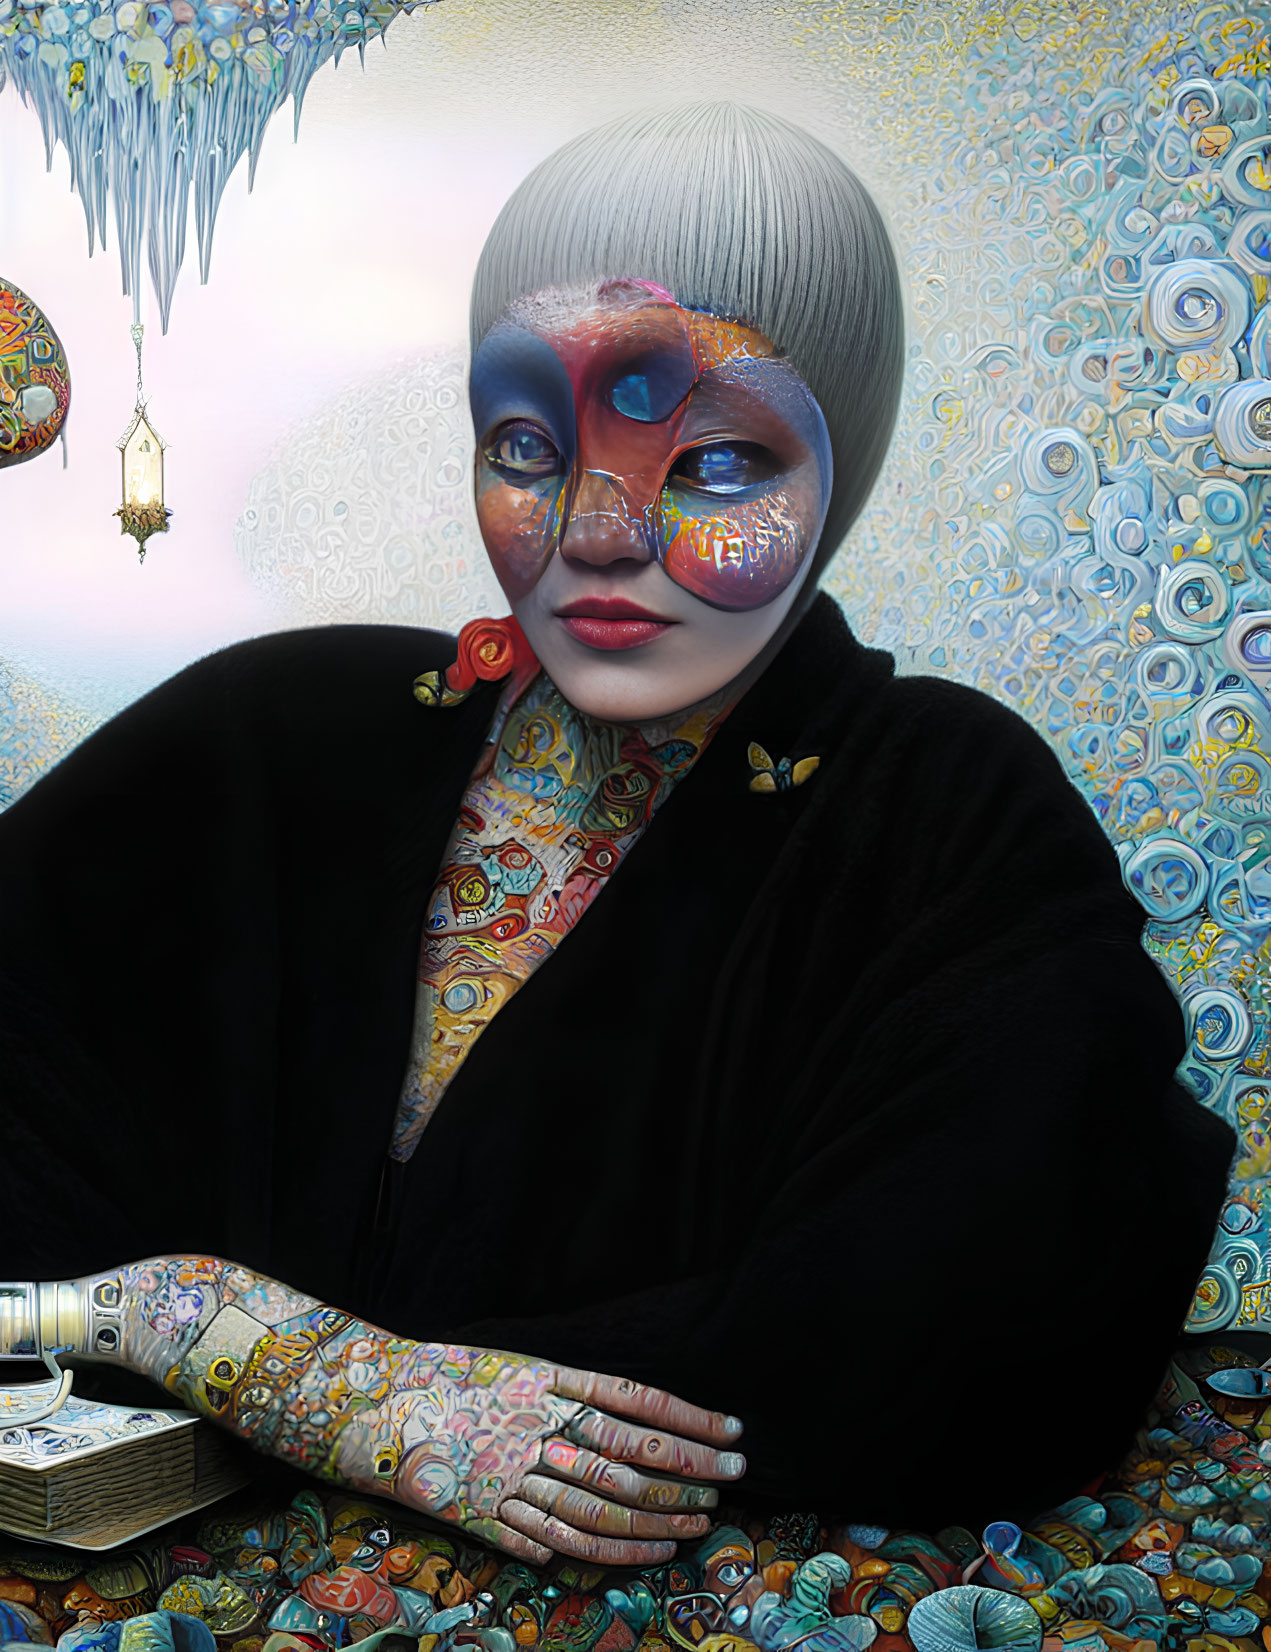 Vibrant face paint and tattooed arms in surreal setting with cards